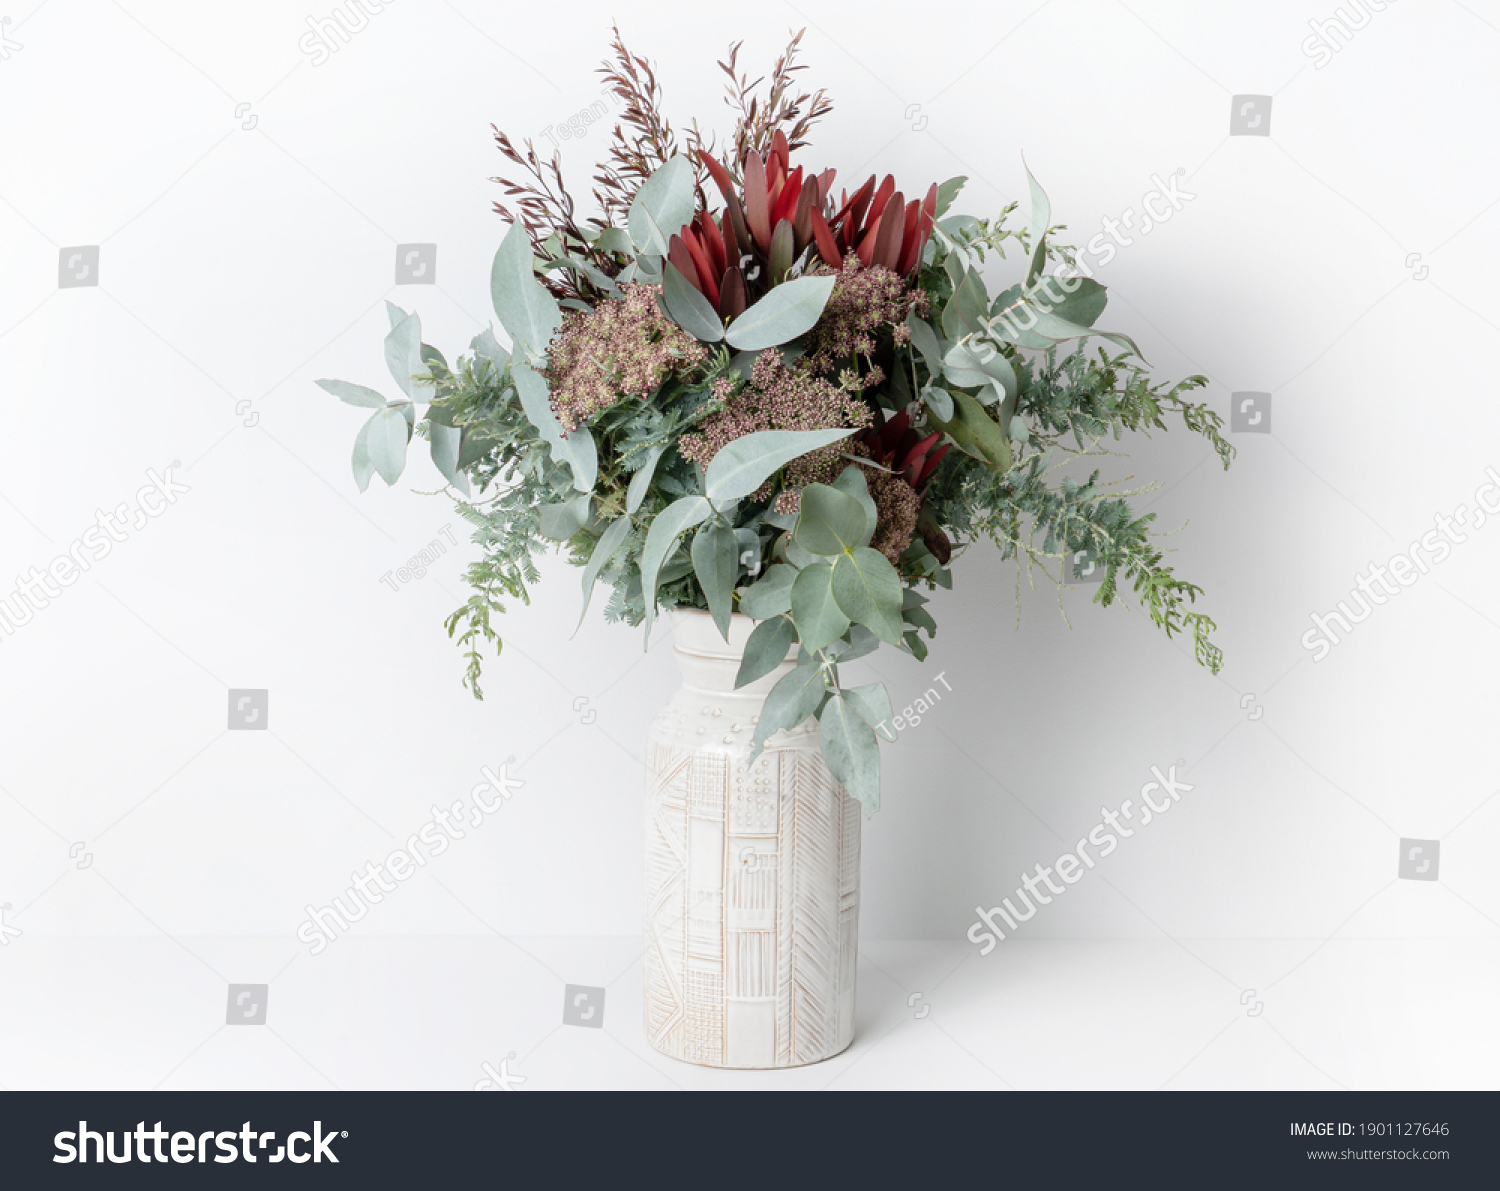 Beautiful flower arrangement of mostly Australian native flowers, including Silvan Reds, Queen Anne's Lace, Wattle foliage and Eucalyptus leaves, in a ceramic white vase, with a white background. #1901127646